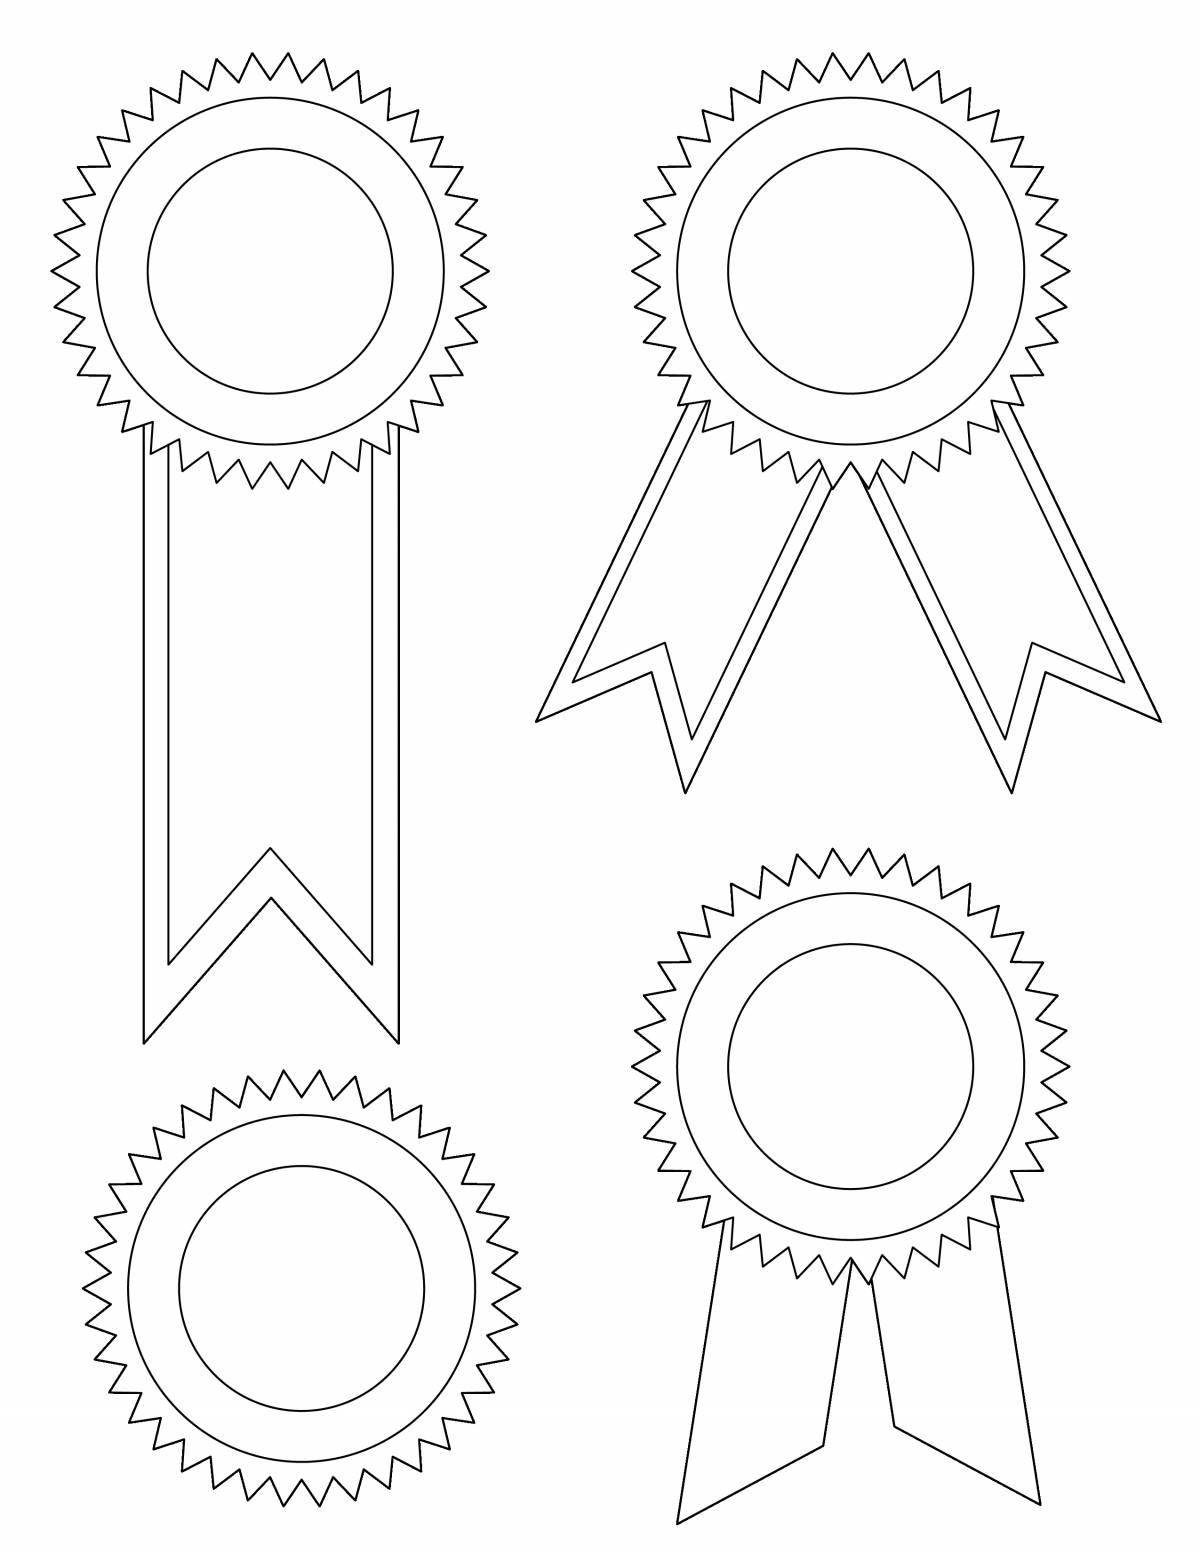 Coloring page of the medal template